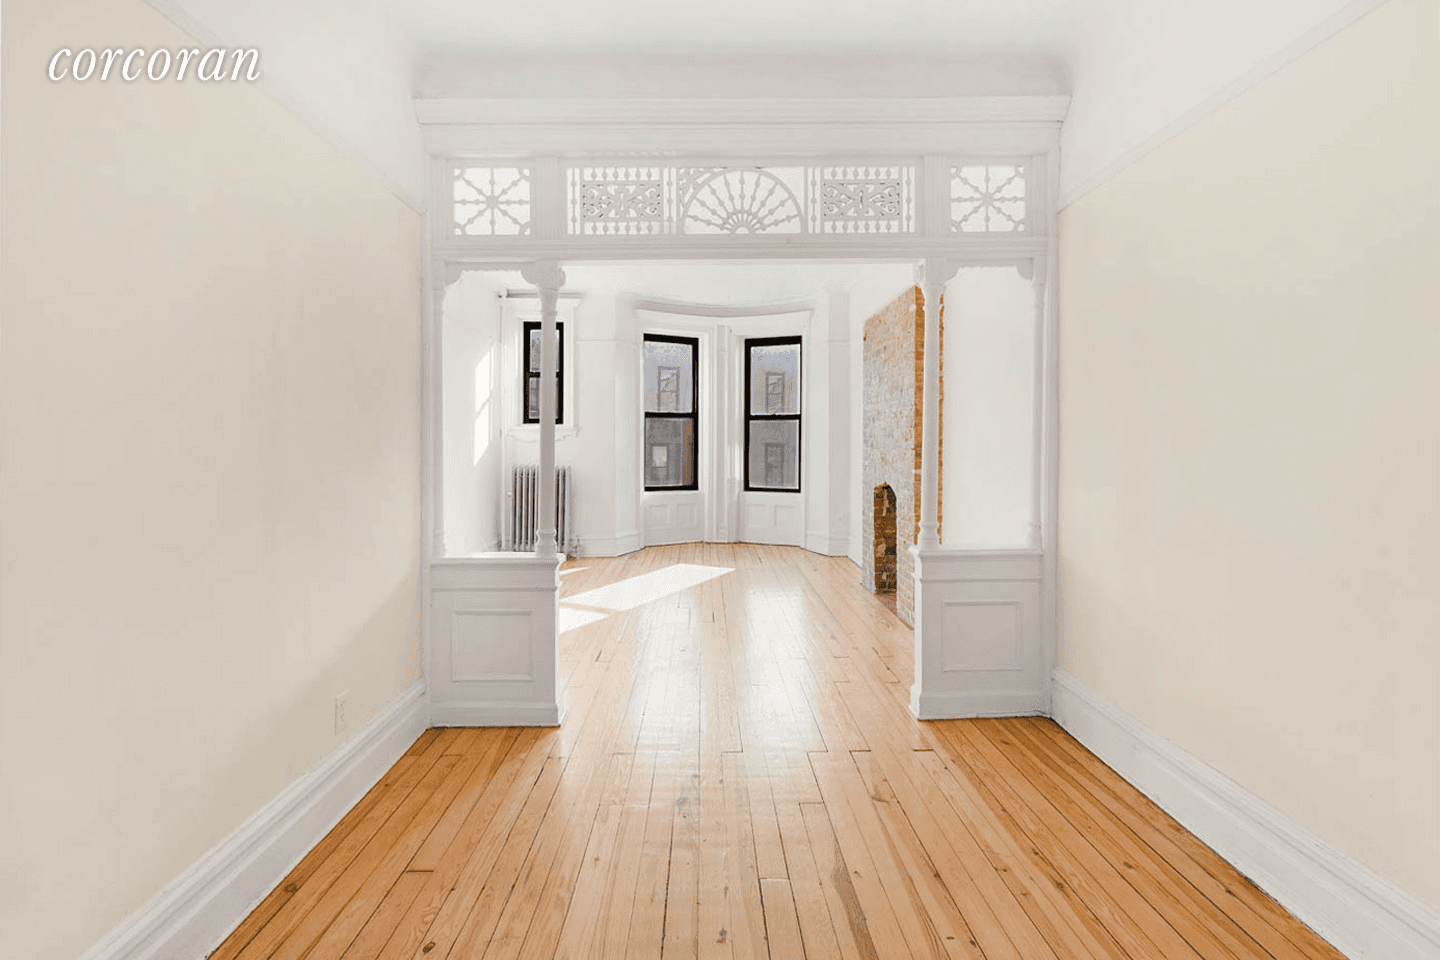 This spacious 1200 square foot 2 bedroom 1 bath apartment which has bright southern and northern exposures, garden view with beautiful pre war details throughout and high ceilings.